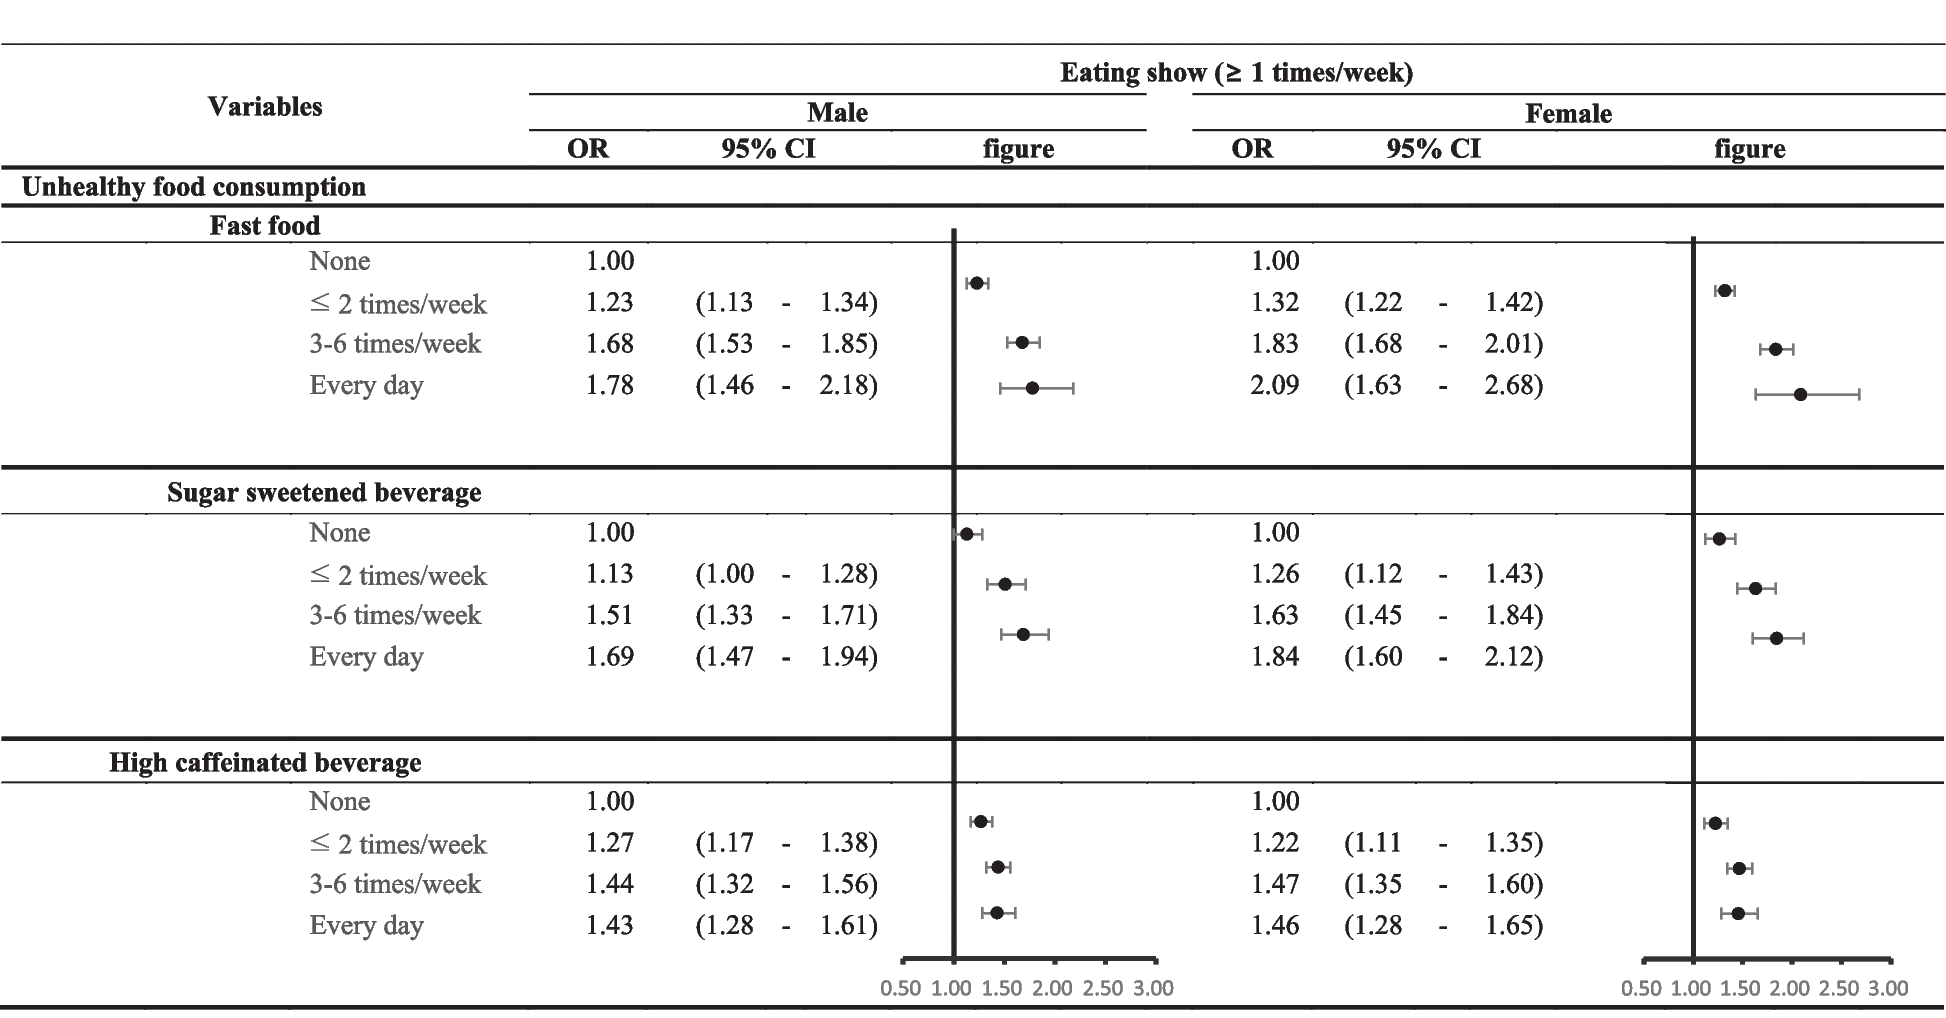 Association between watching eating shows and unhealthy food consumption in Korean adolescents